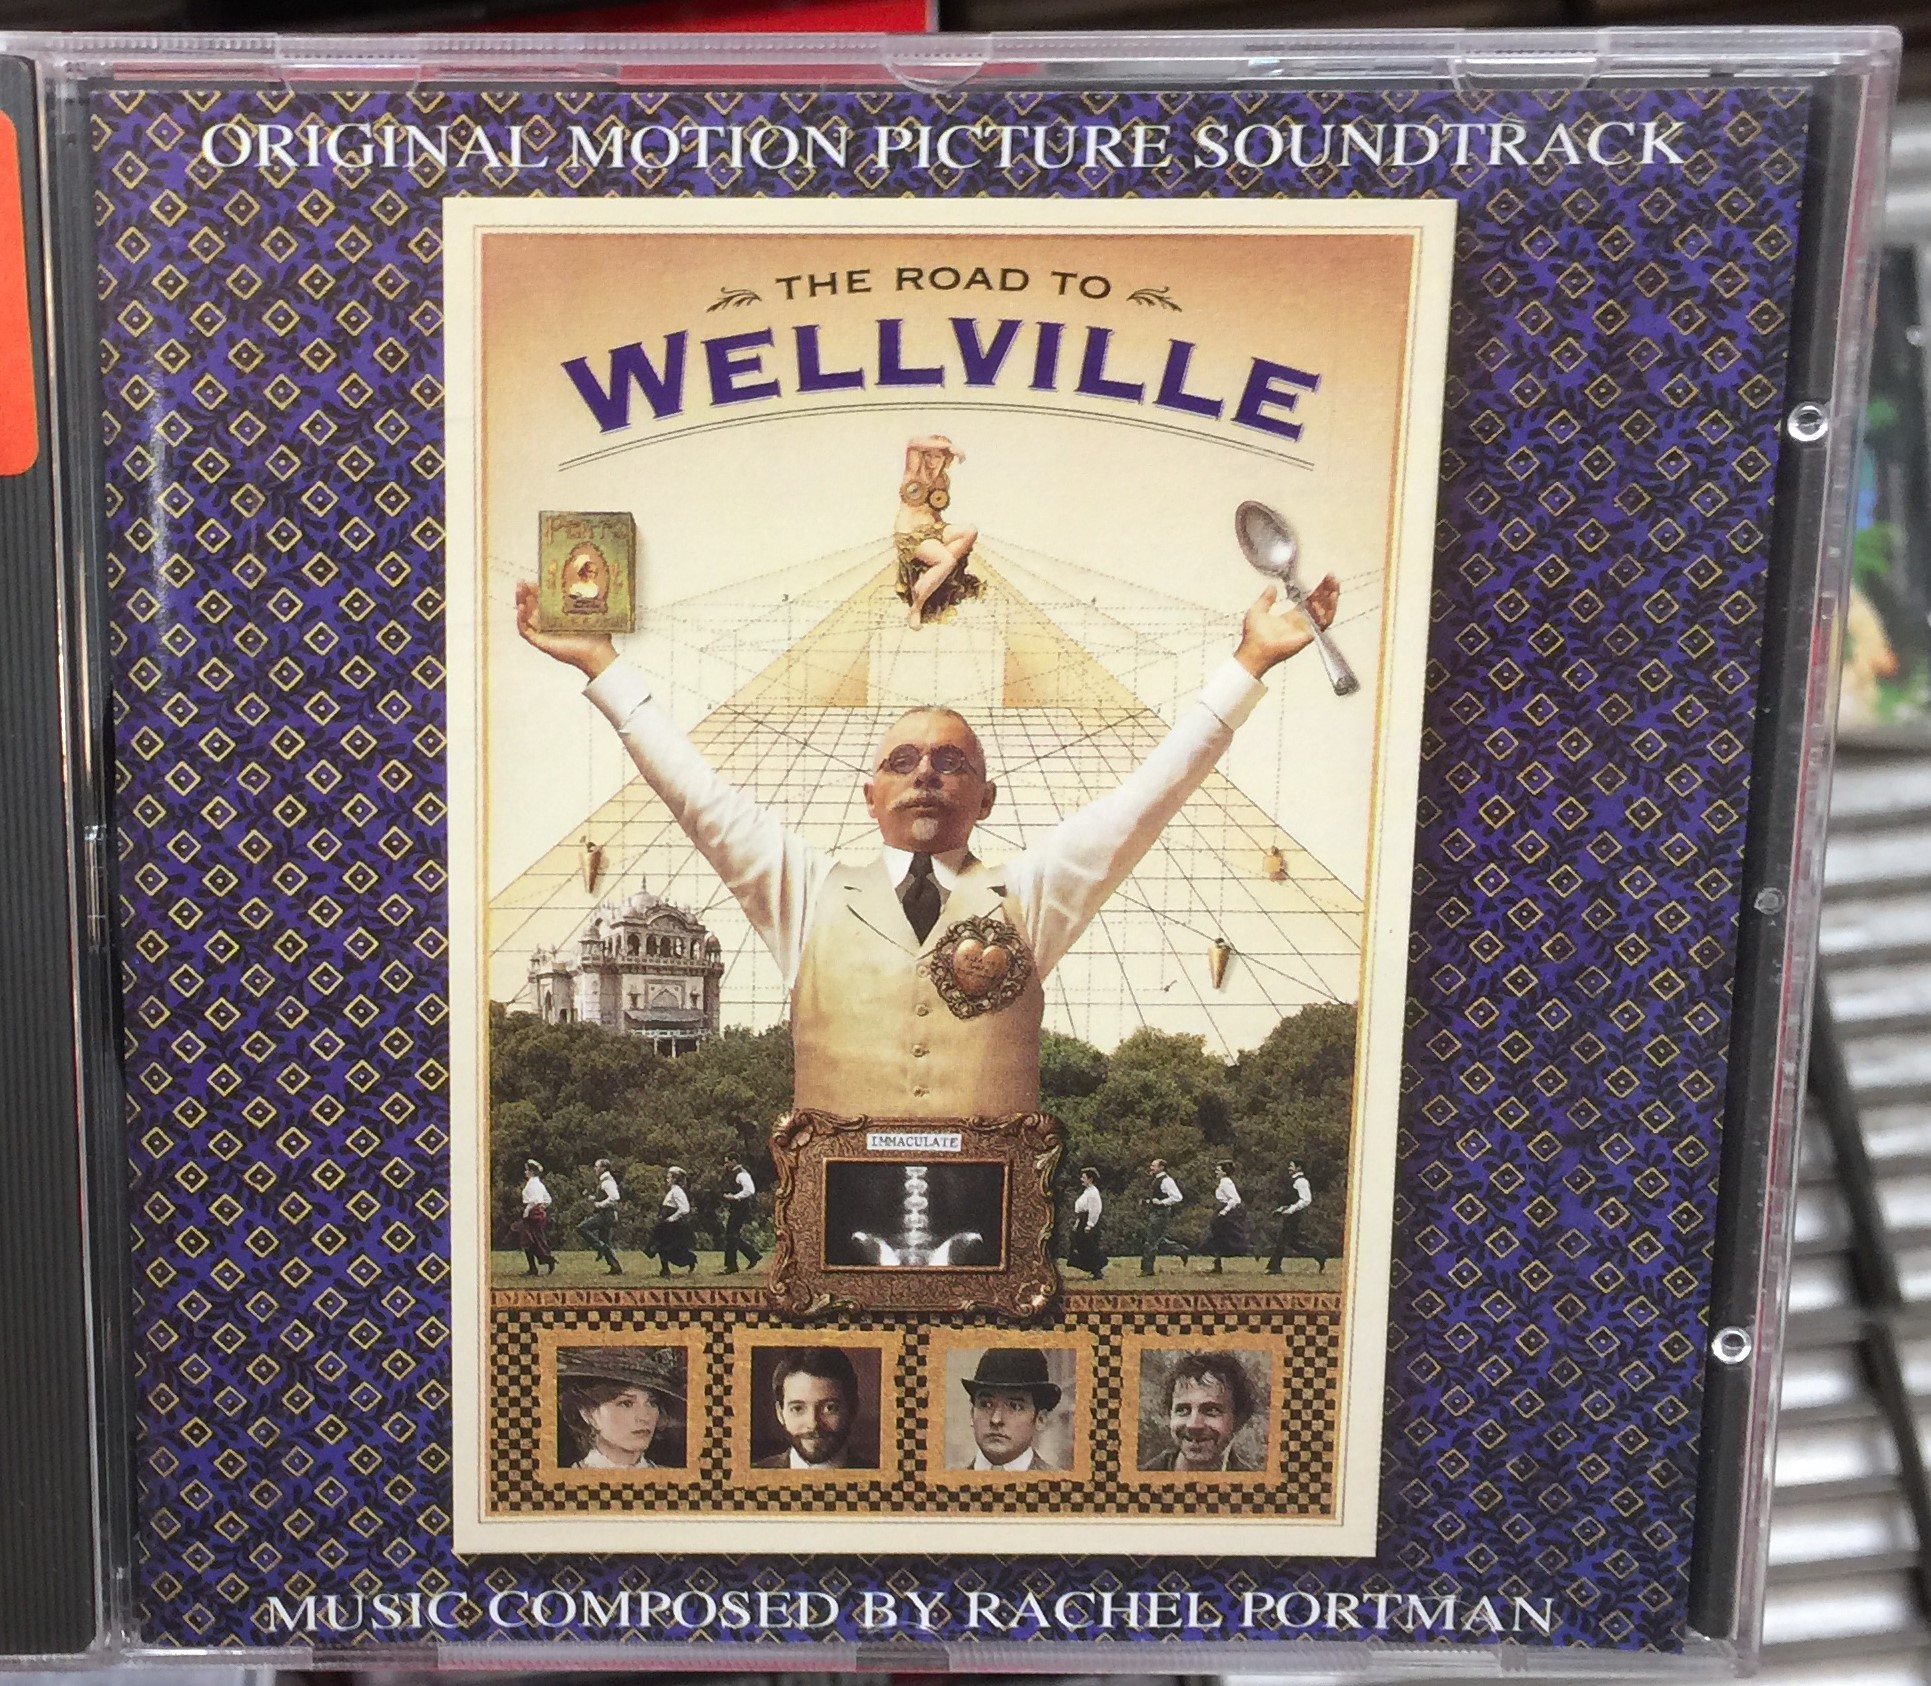 original-motion-picture-soundtrack-the-road-to-wellville-music-composed-by-rachel-portman-columbia-audio-cd-1994-4005939551223-1-.jpg